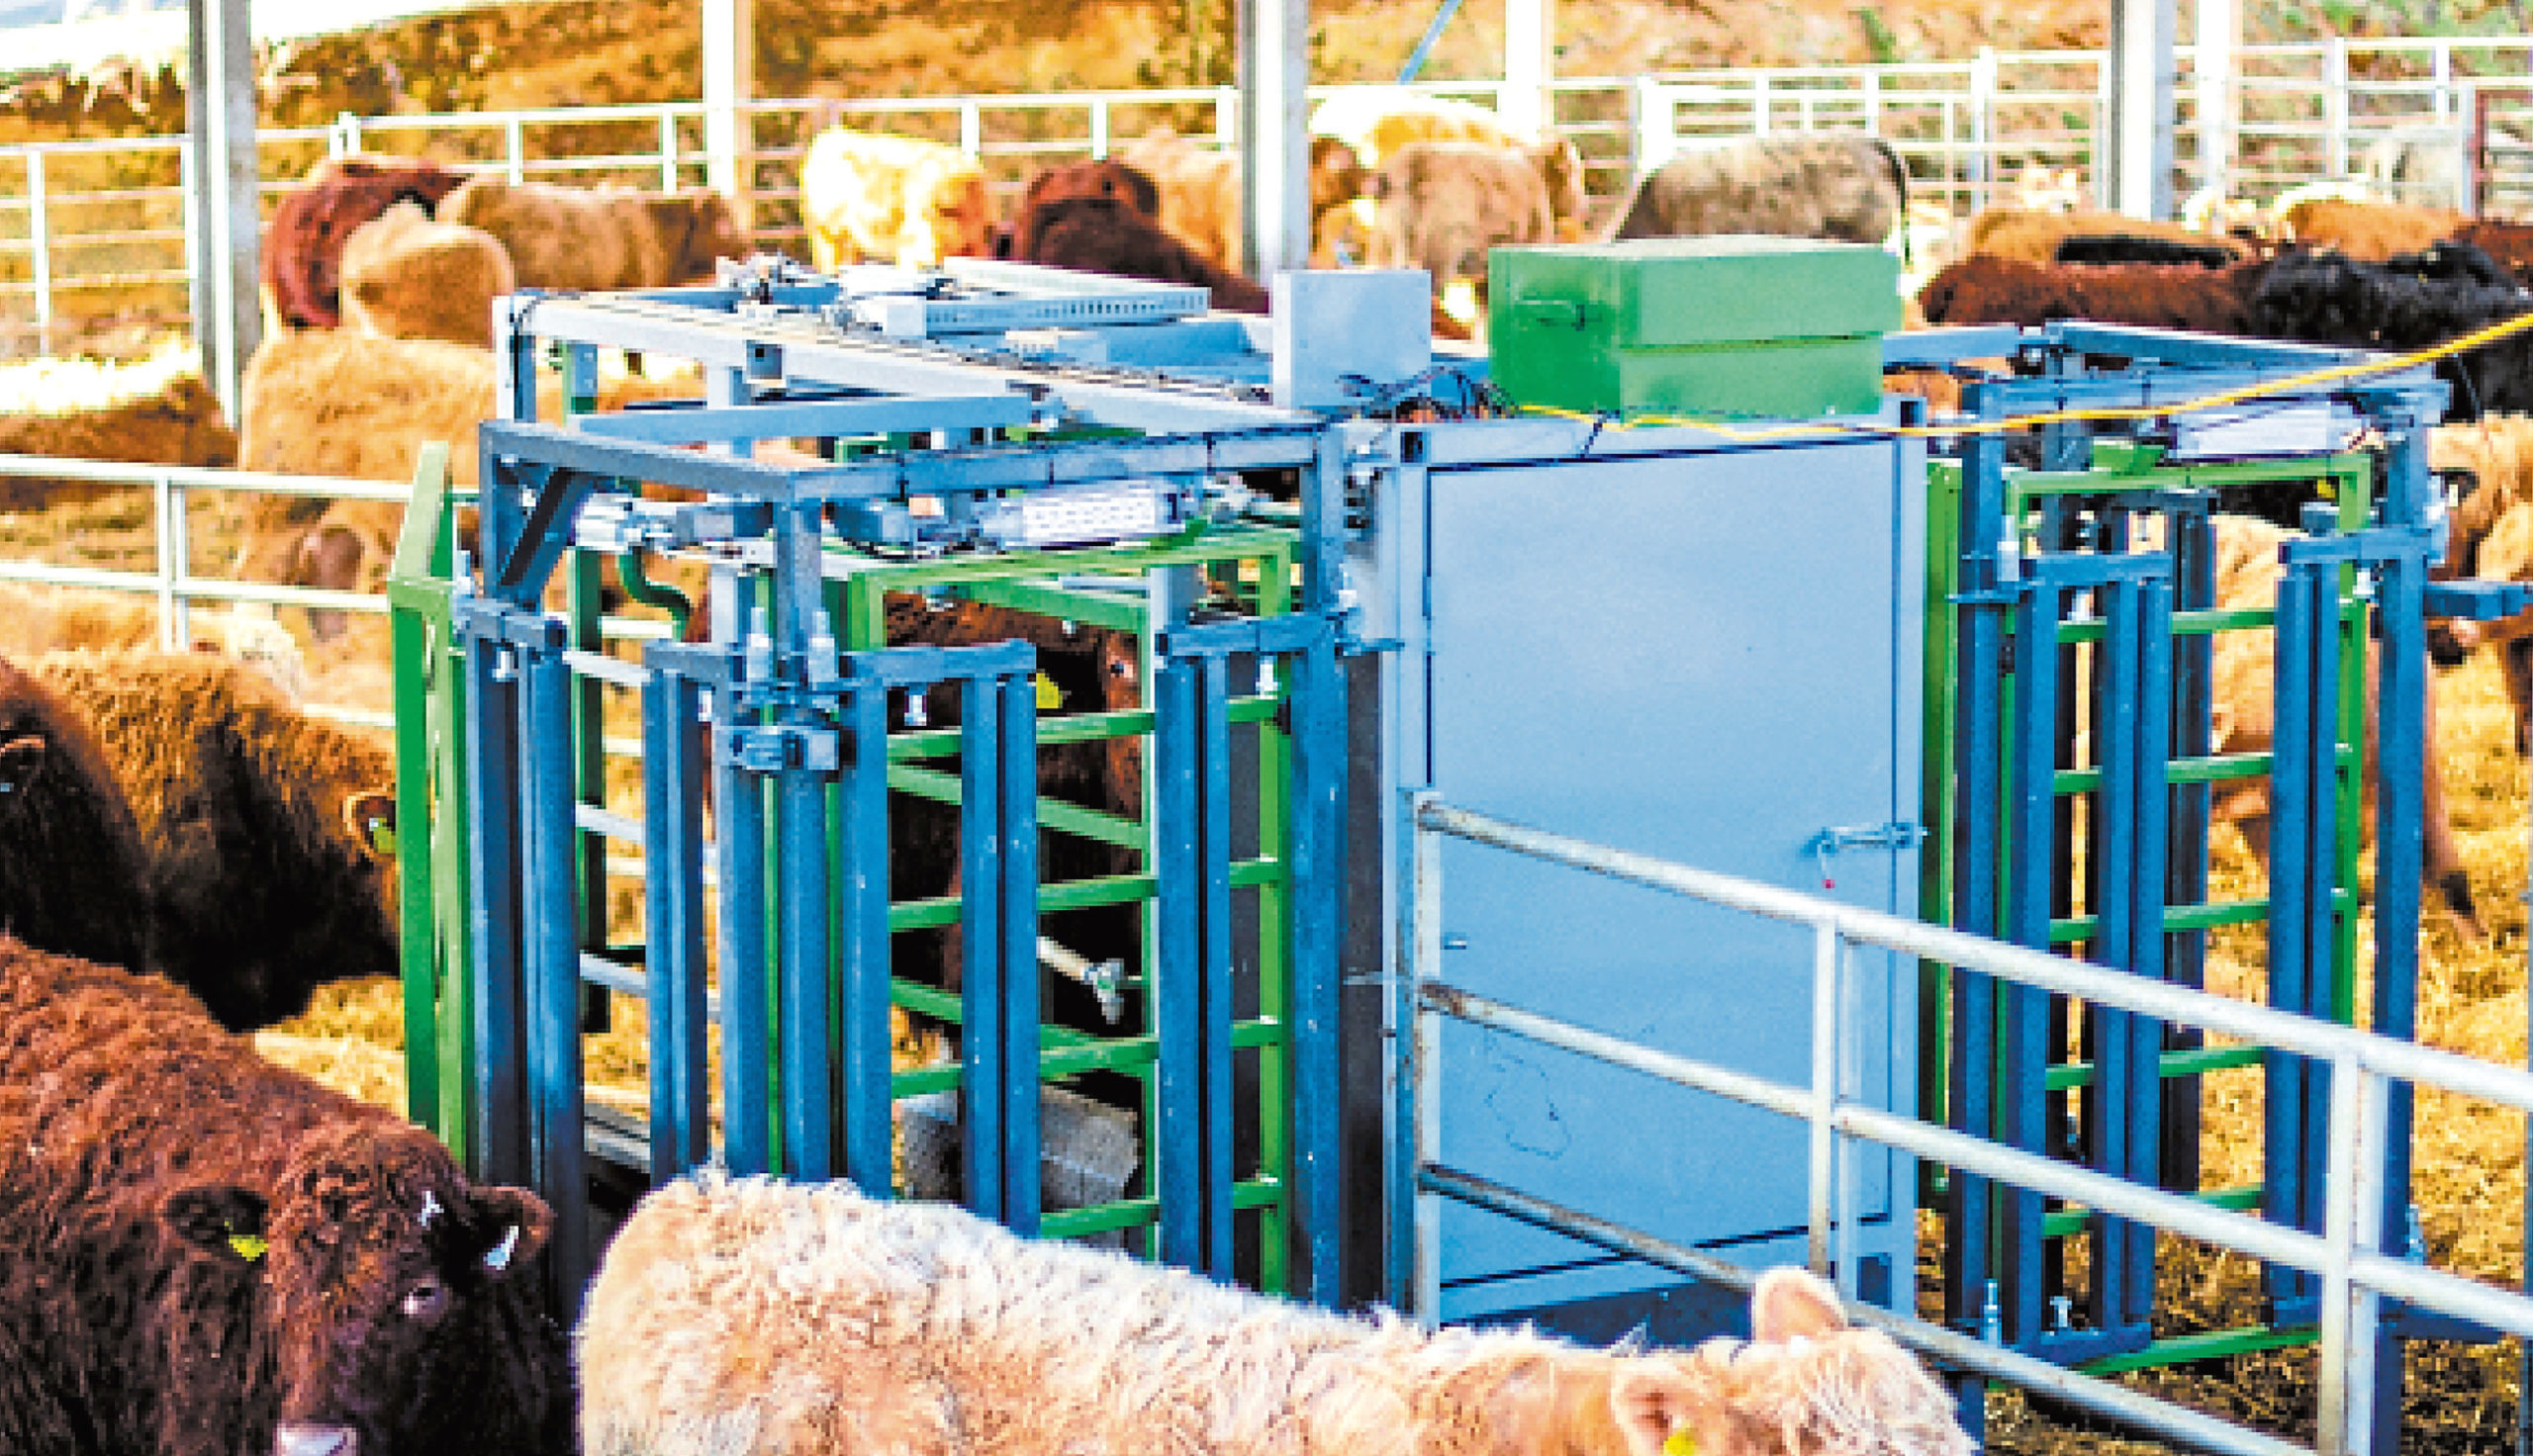 The stockman system from Herd Advance.